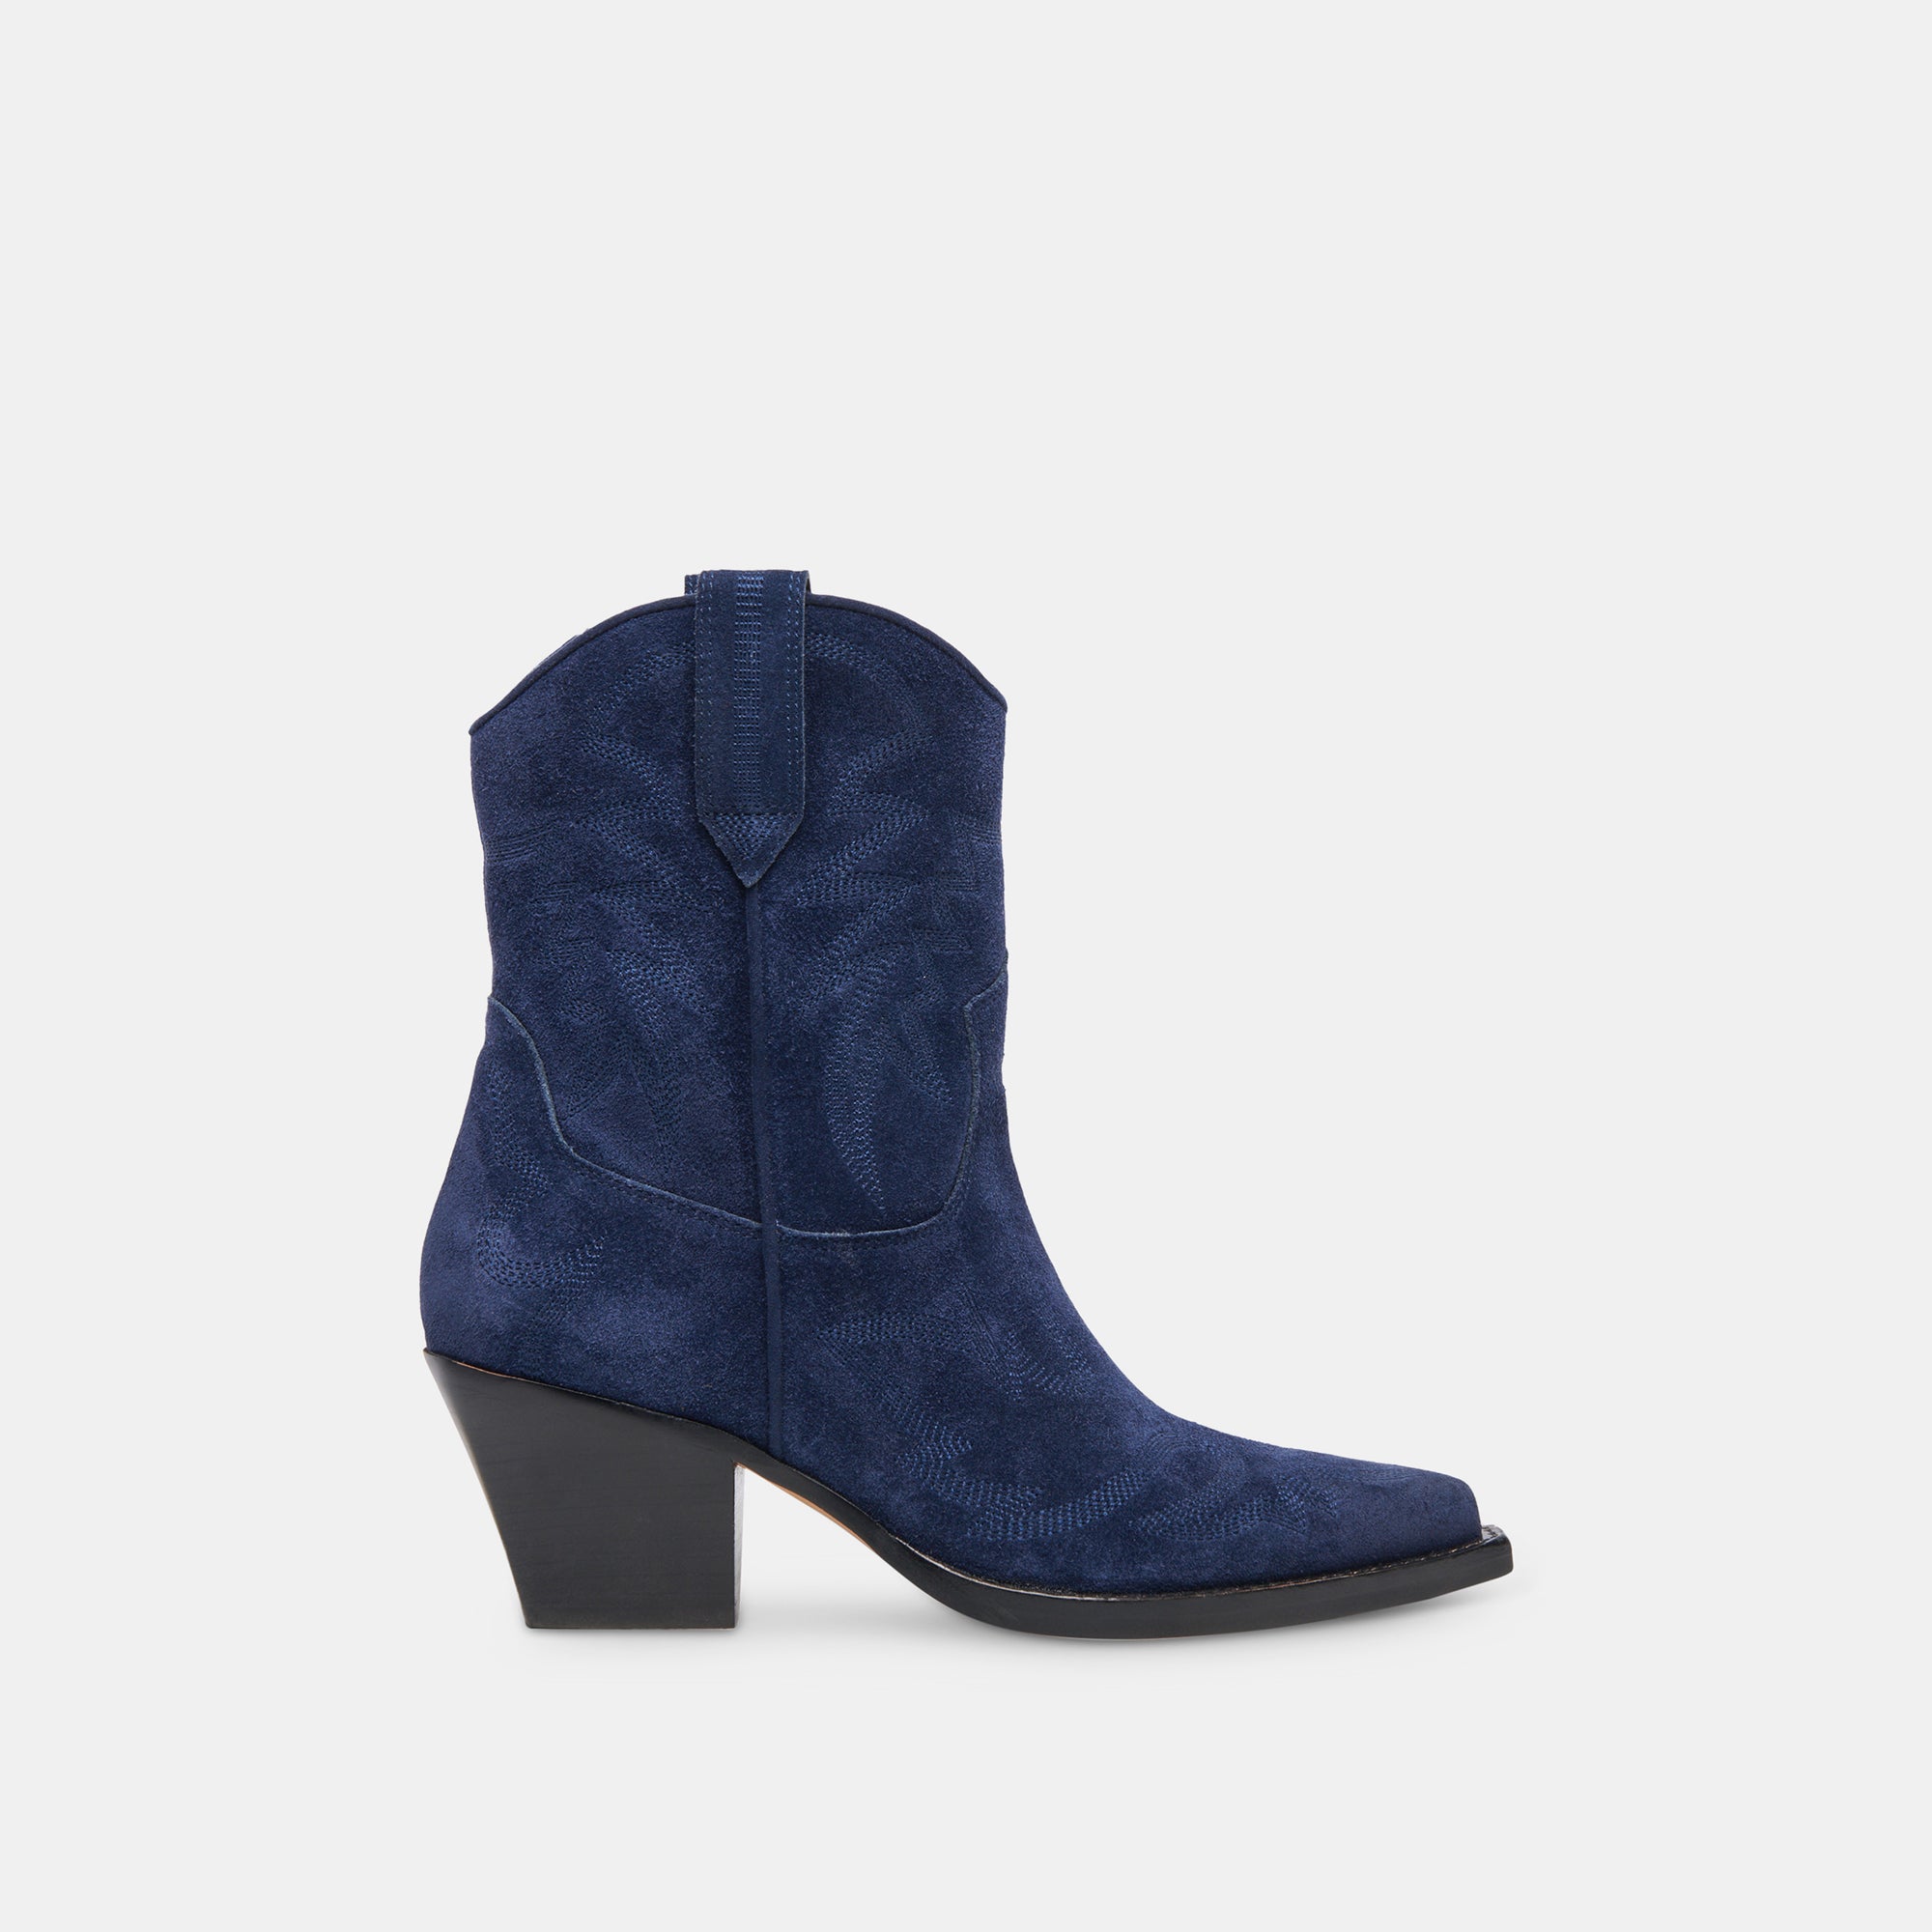 Runa Boots Royal Blue Suede | Western Royal Blue Boots – Dolce Vita